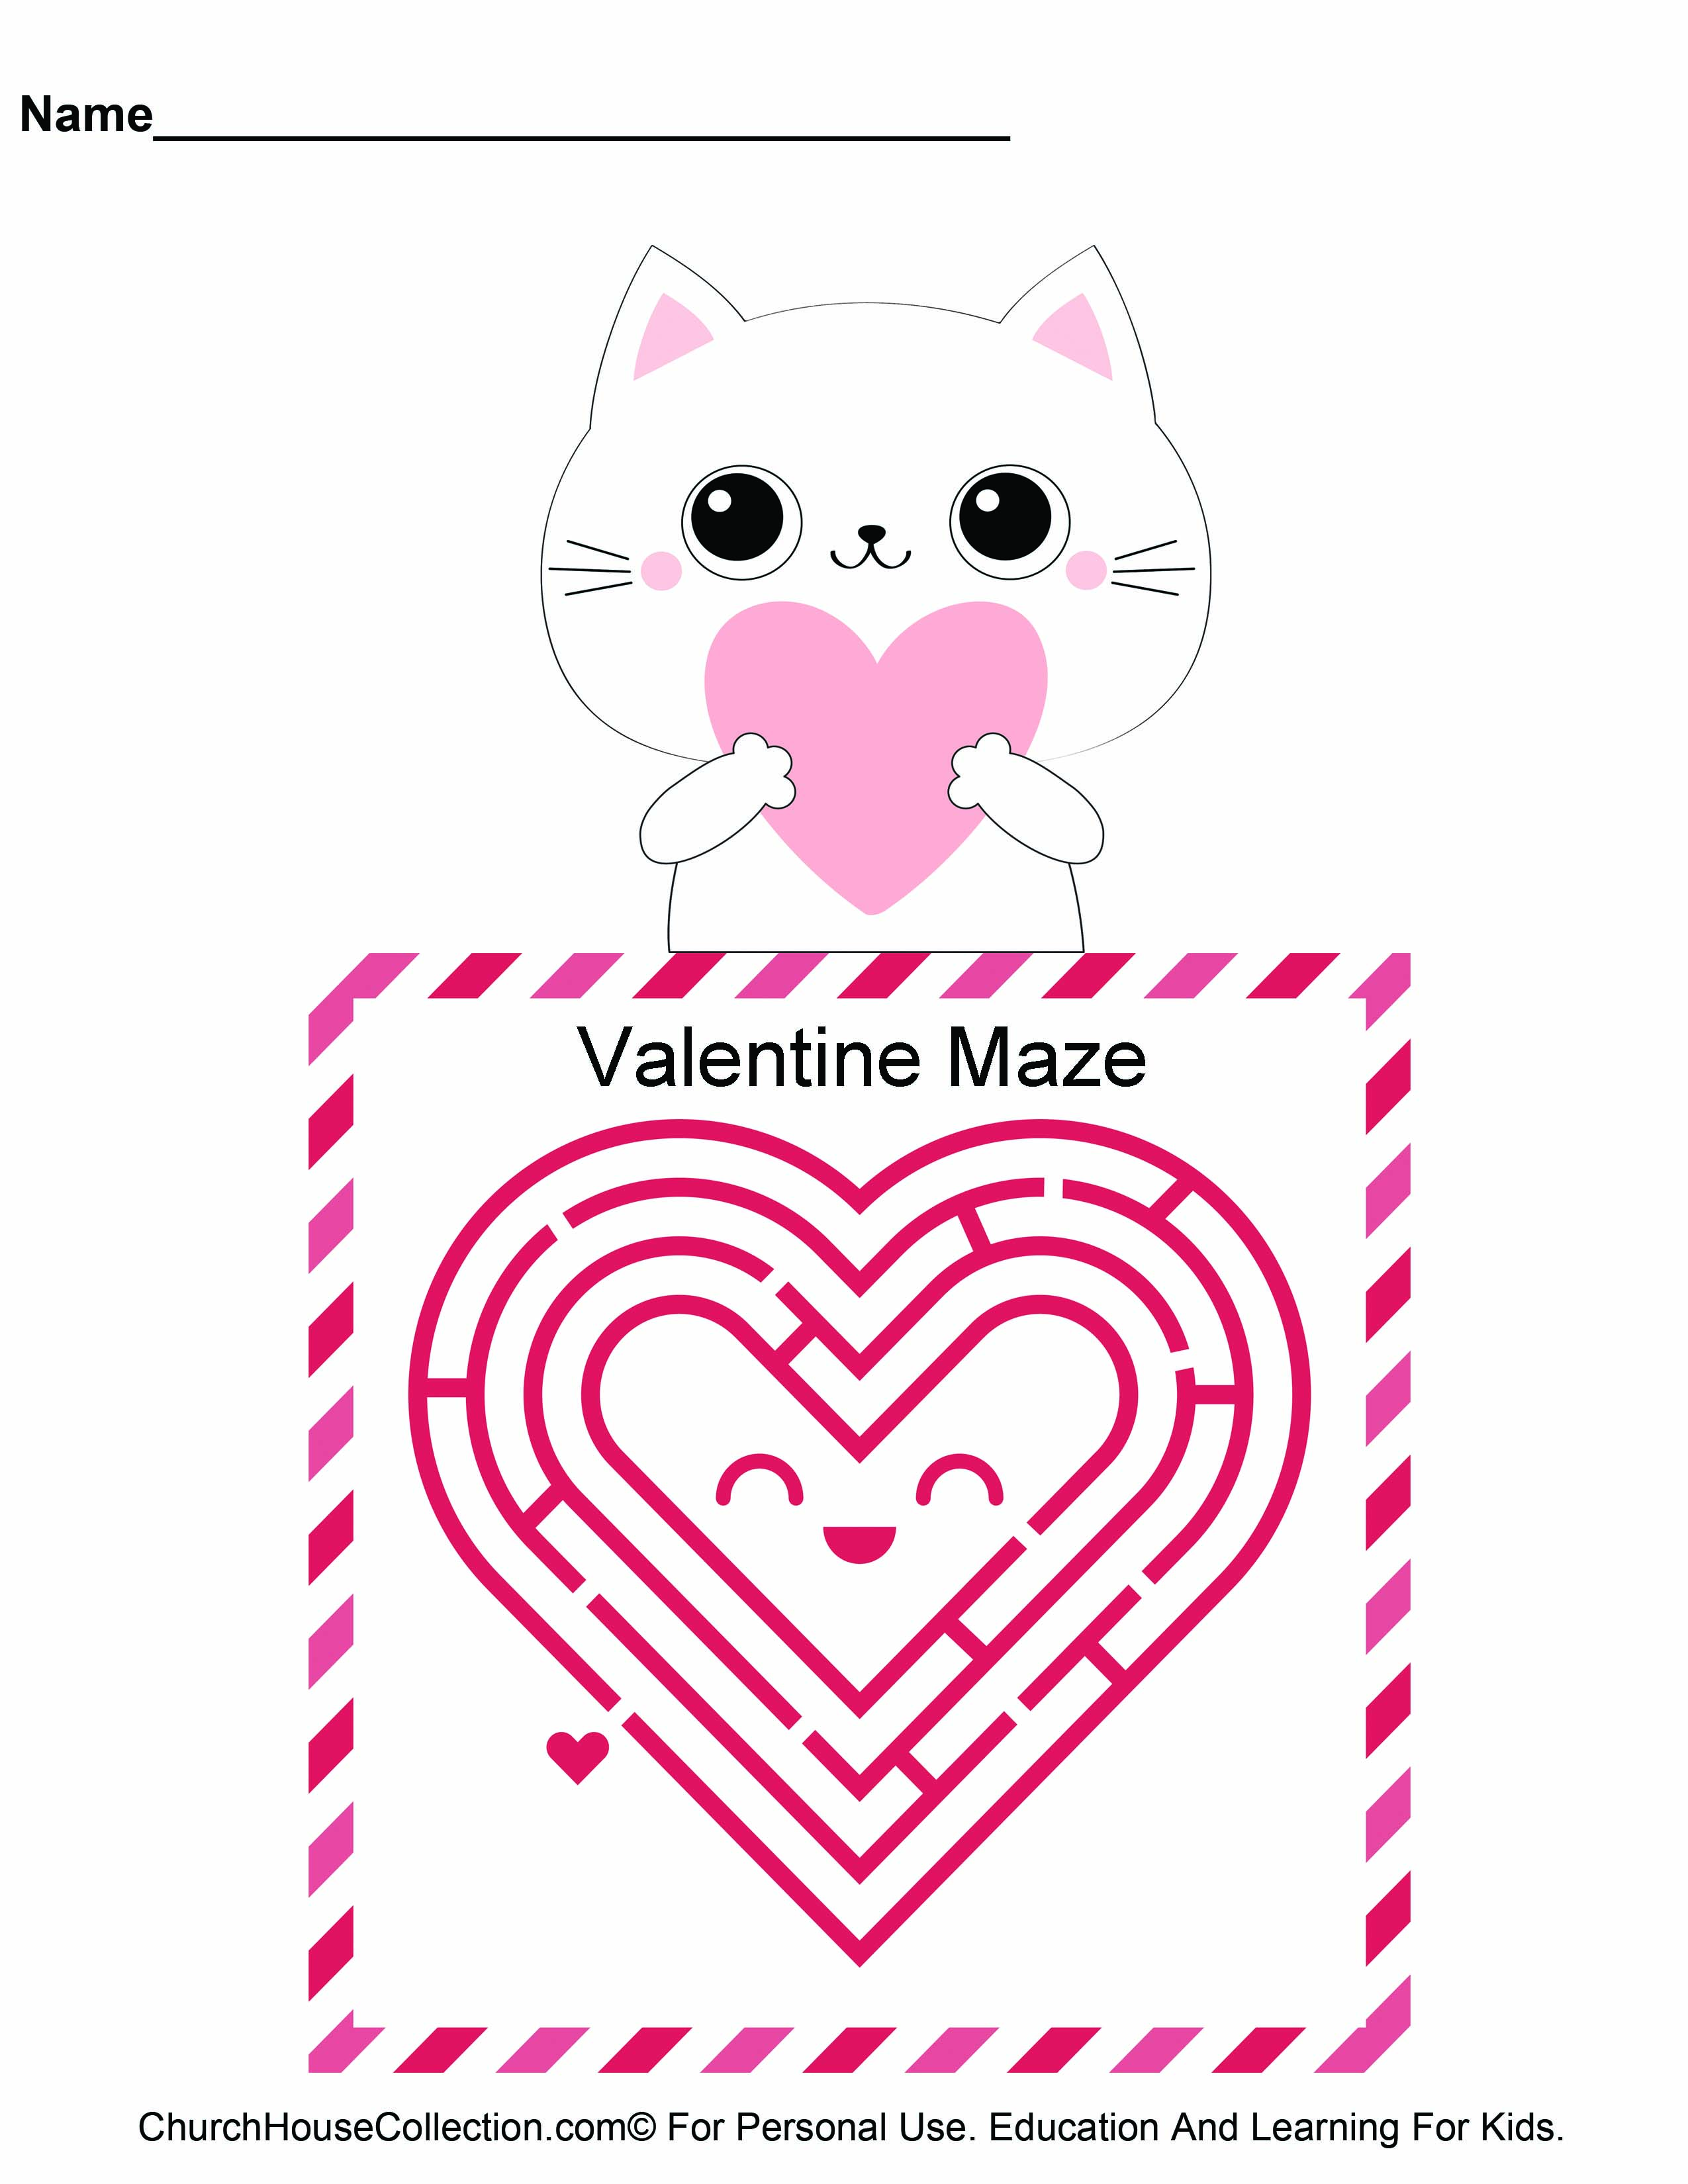 Free Printable Valentine's Day Kitty Cat Maze by Church House Collection